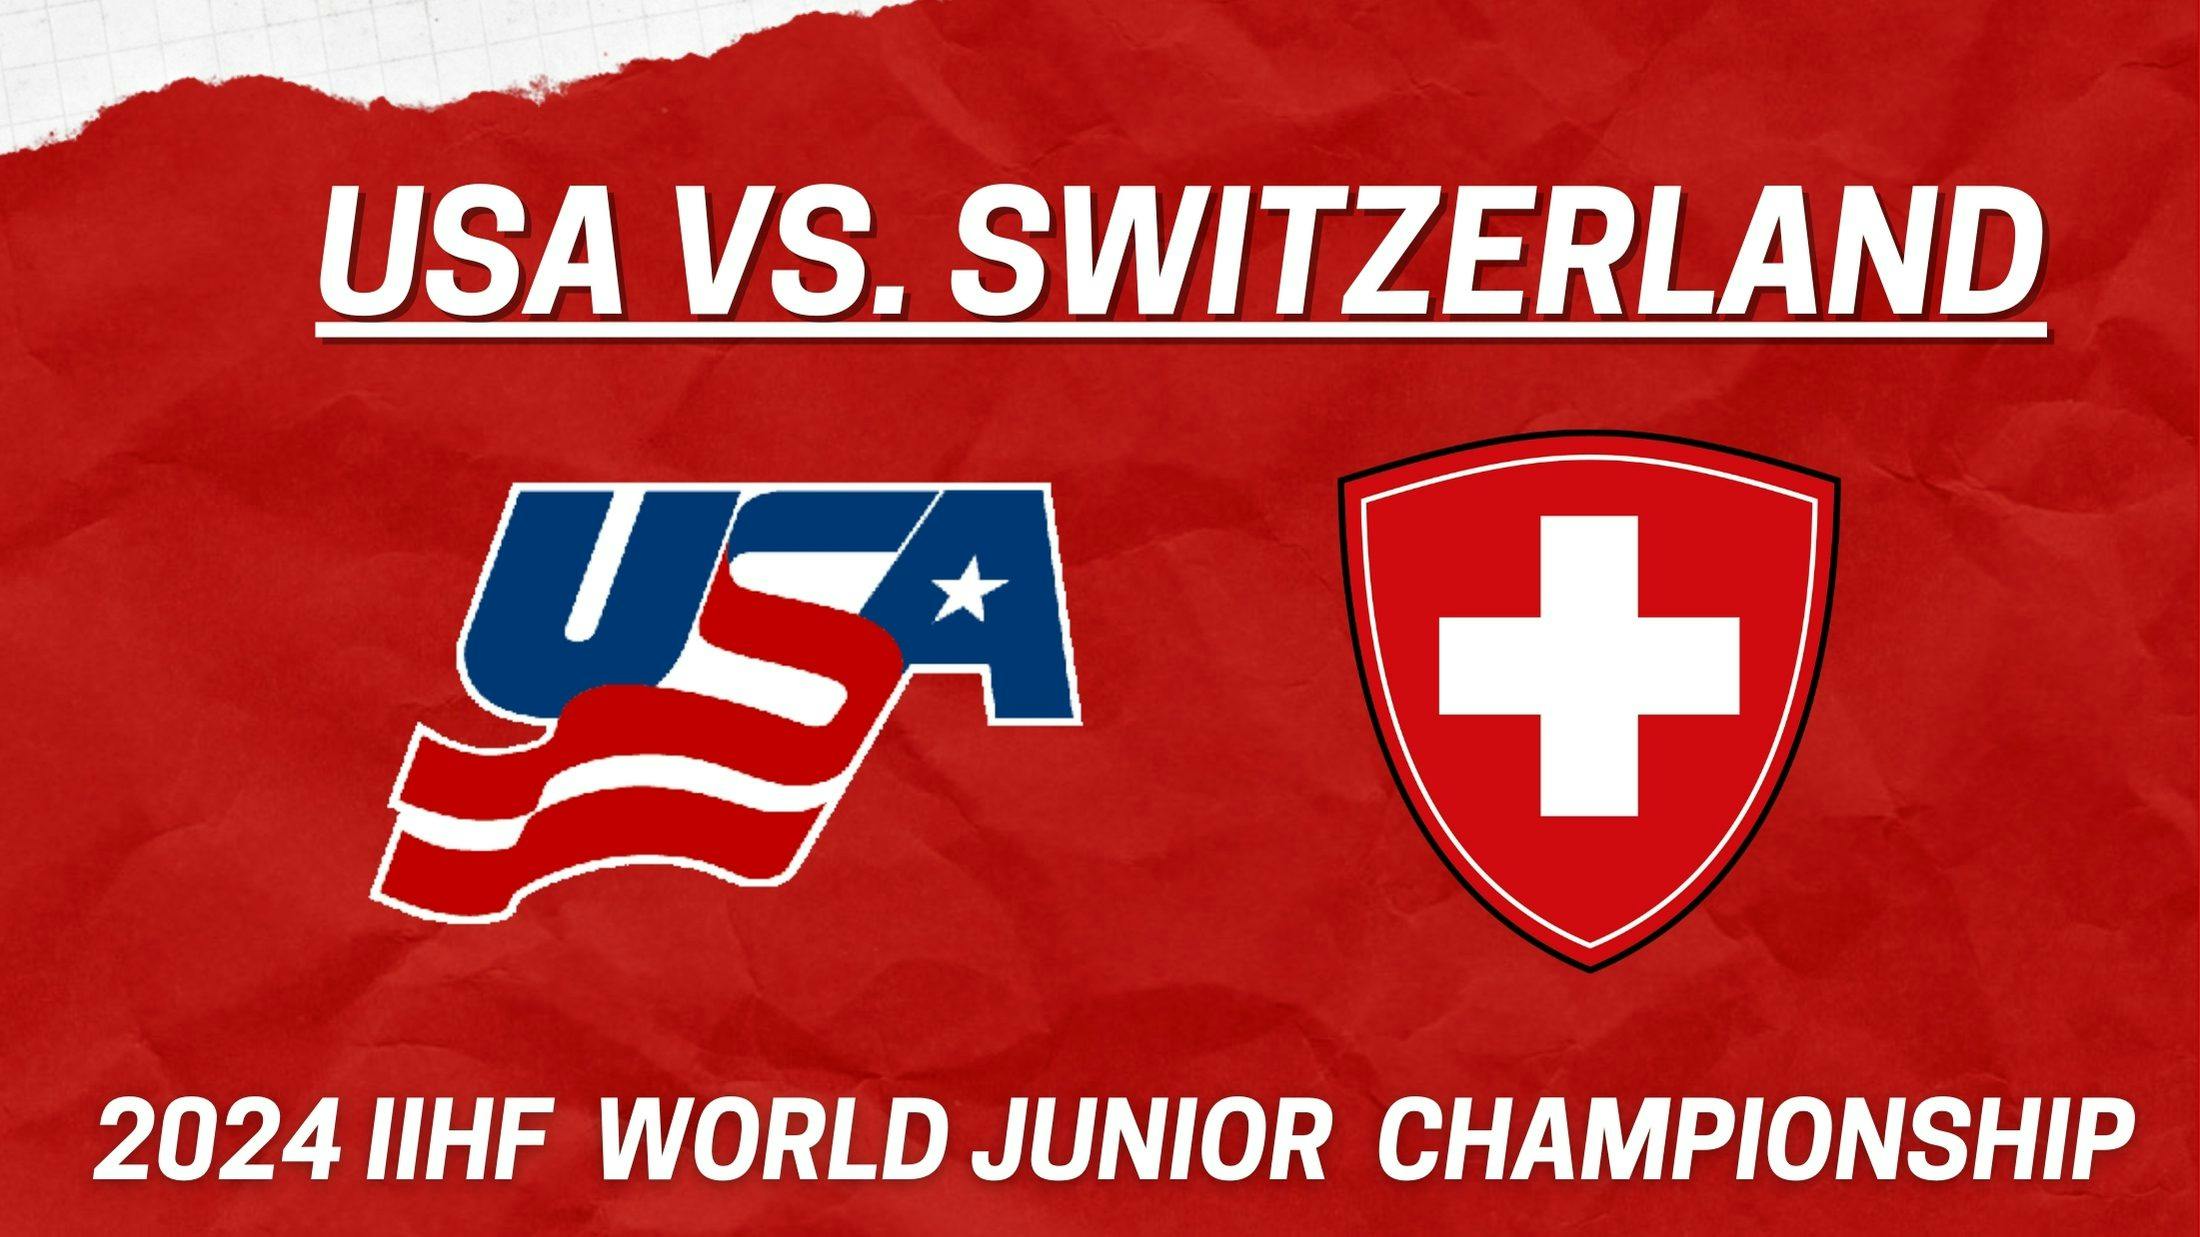 Top standouts from USA vs. Switzerland at 2024 World Junior Championship